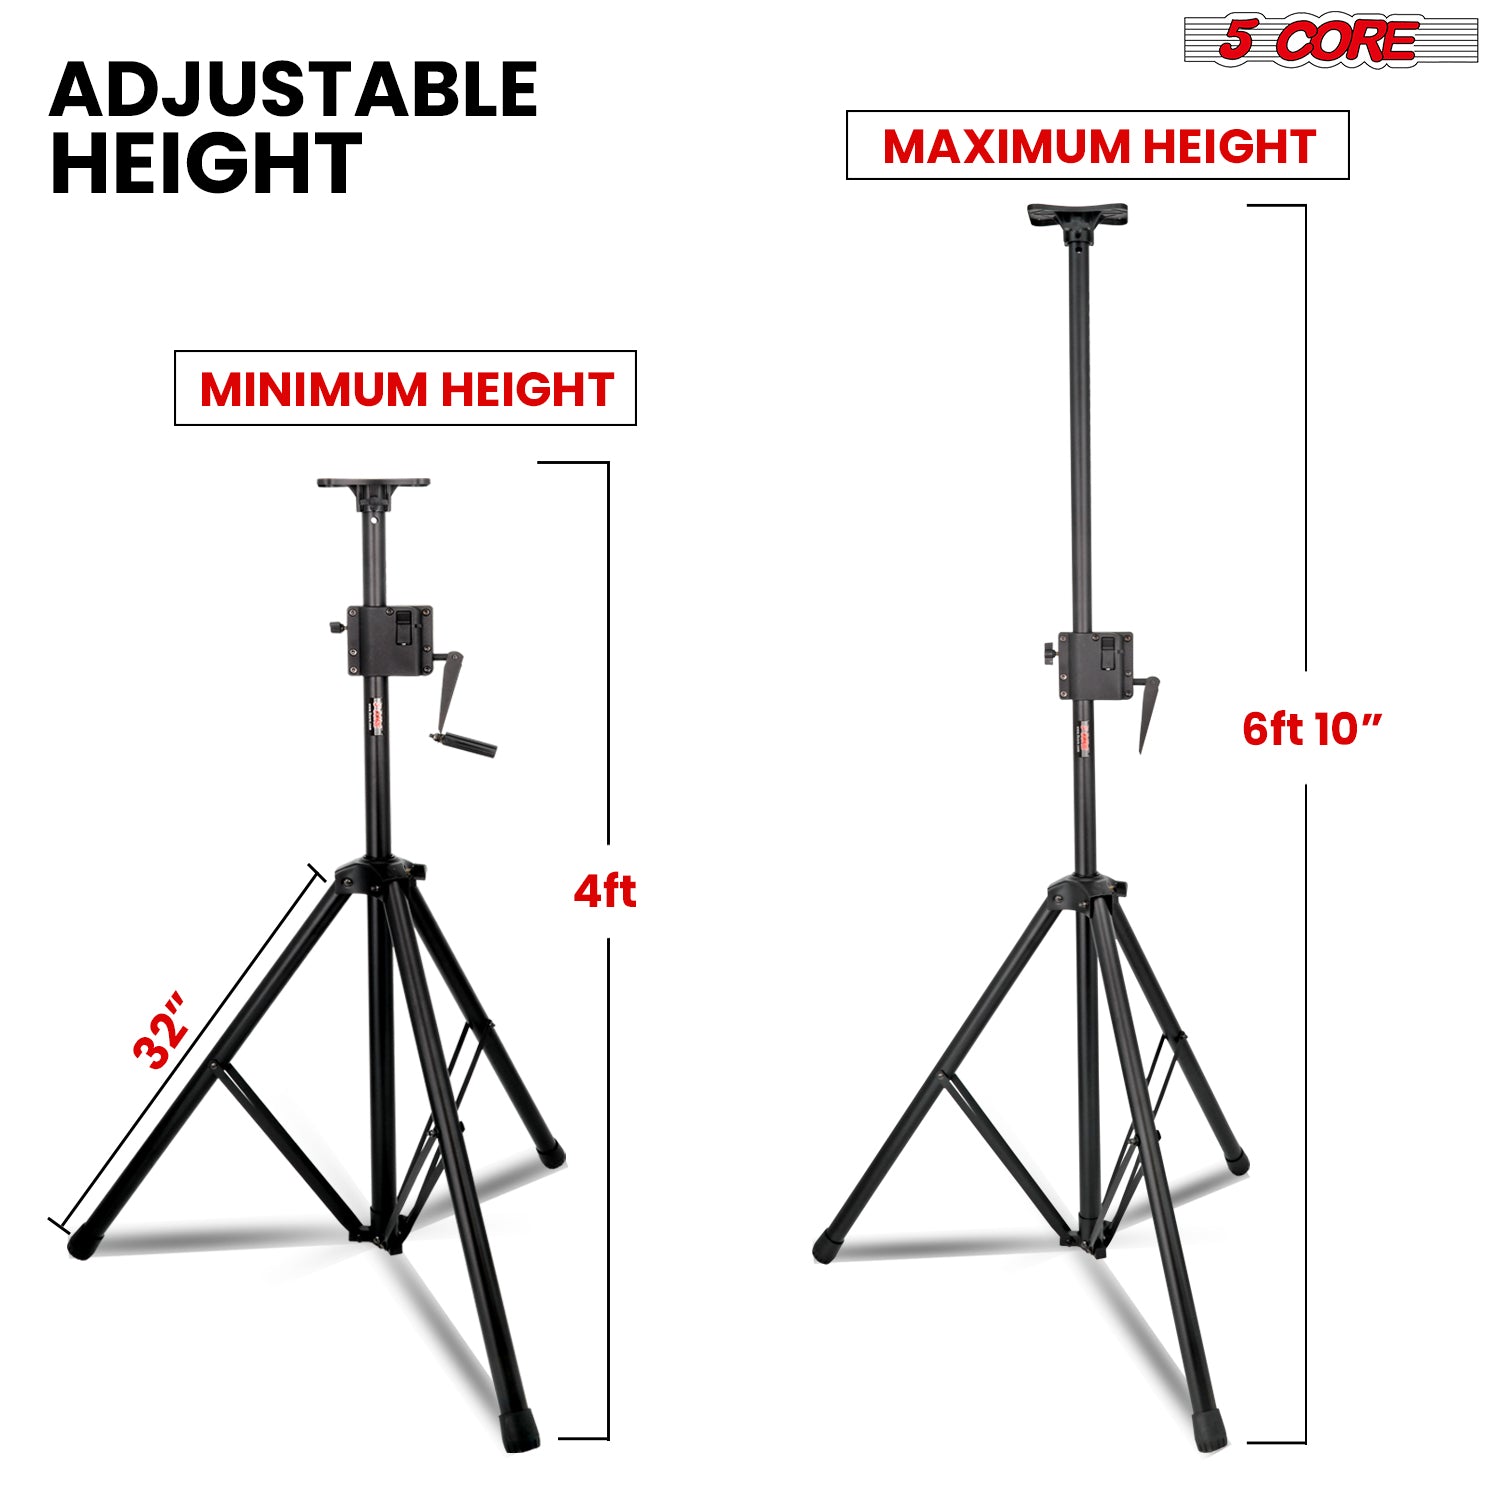 5 Core Crank Up Speaker Stand Height Adjustable 6ft-10 Inches Max Heavy Duty for Stage Light DJ monitor Holder 185LB Load Capacity w/ Safety Switch + Aluminum Mount + Carry Bag Black - SS HD CRANK